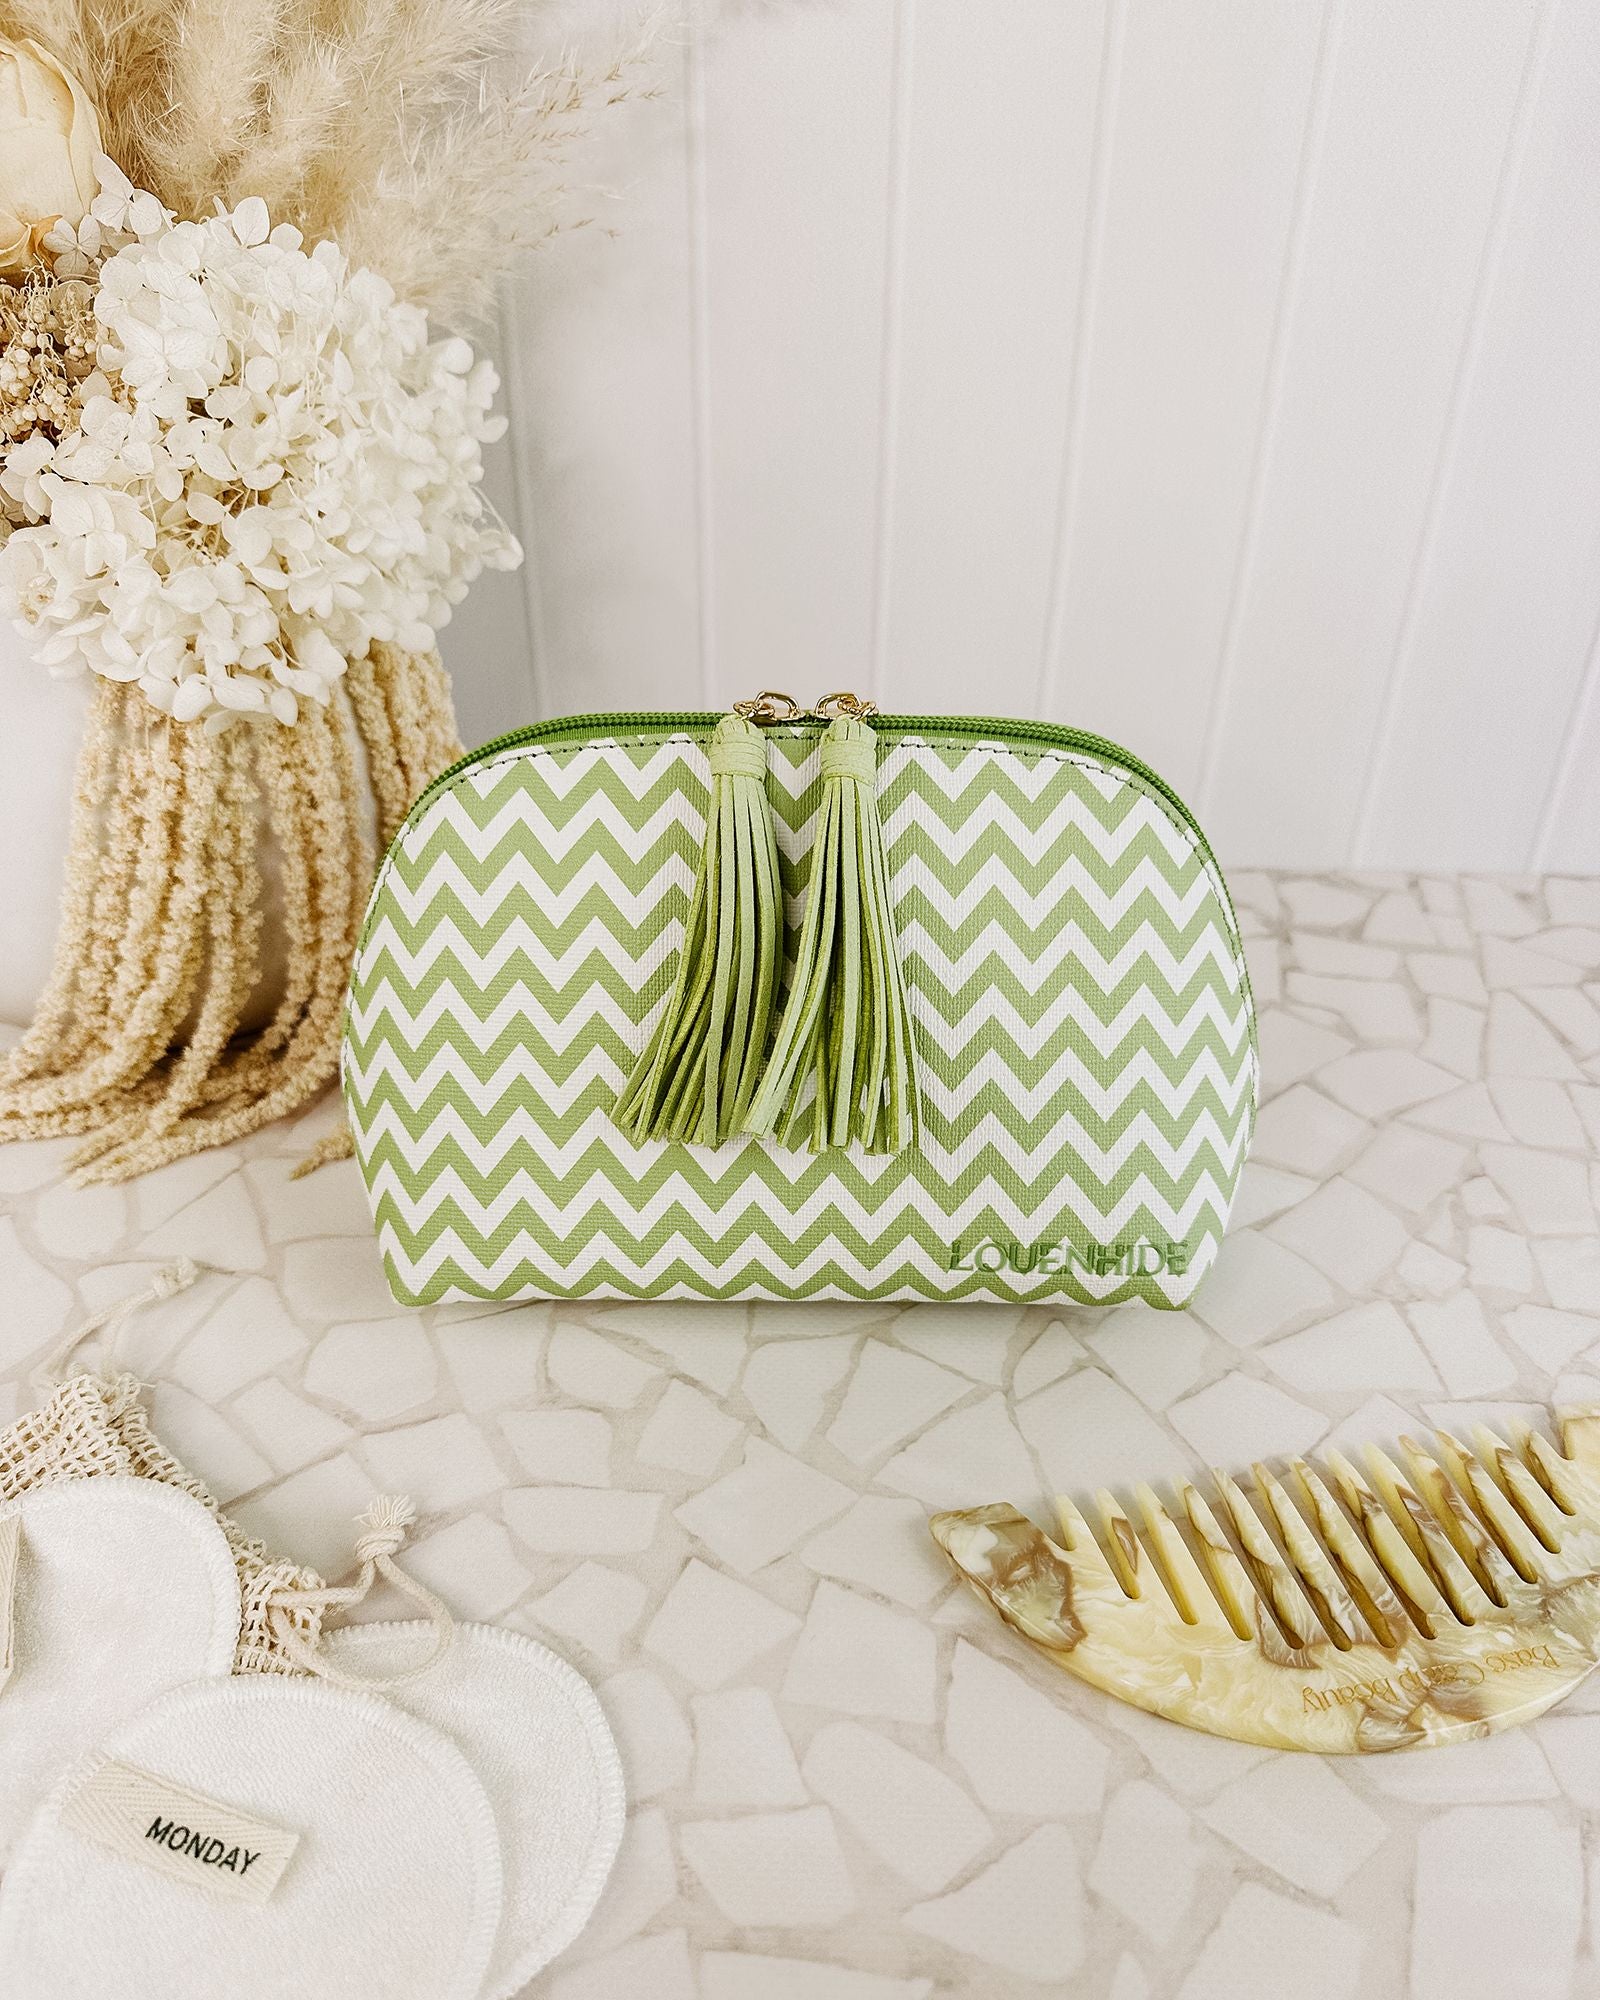 The Louenhide Baby Audrey Chevron Makeup Bag is a small, yet practical cosmetic case to add to your carry-on for your next weekend getaway.